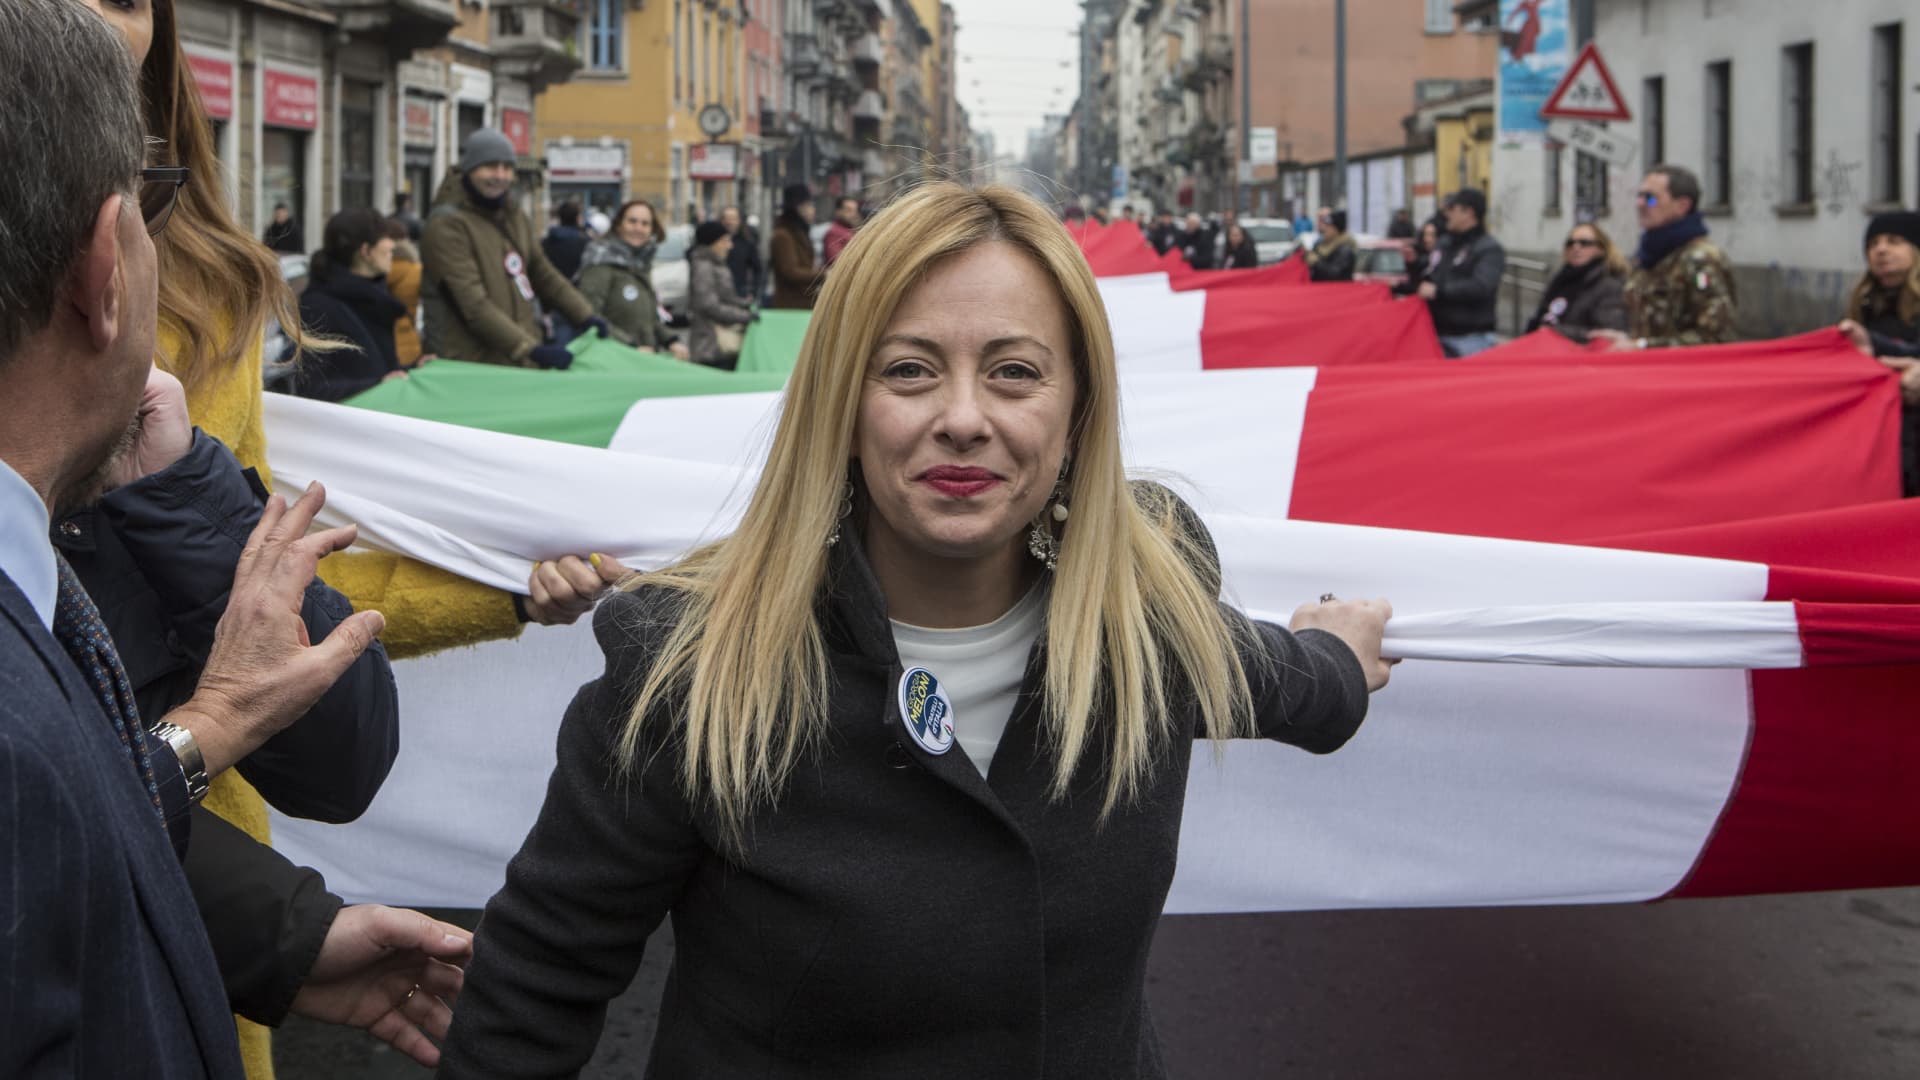 The far-right is expected to win Italy's election in Rome's biggest political shift for decades